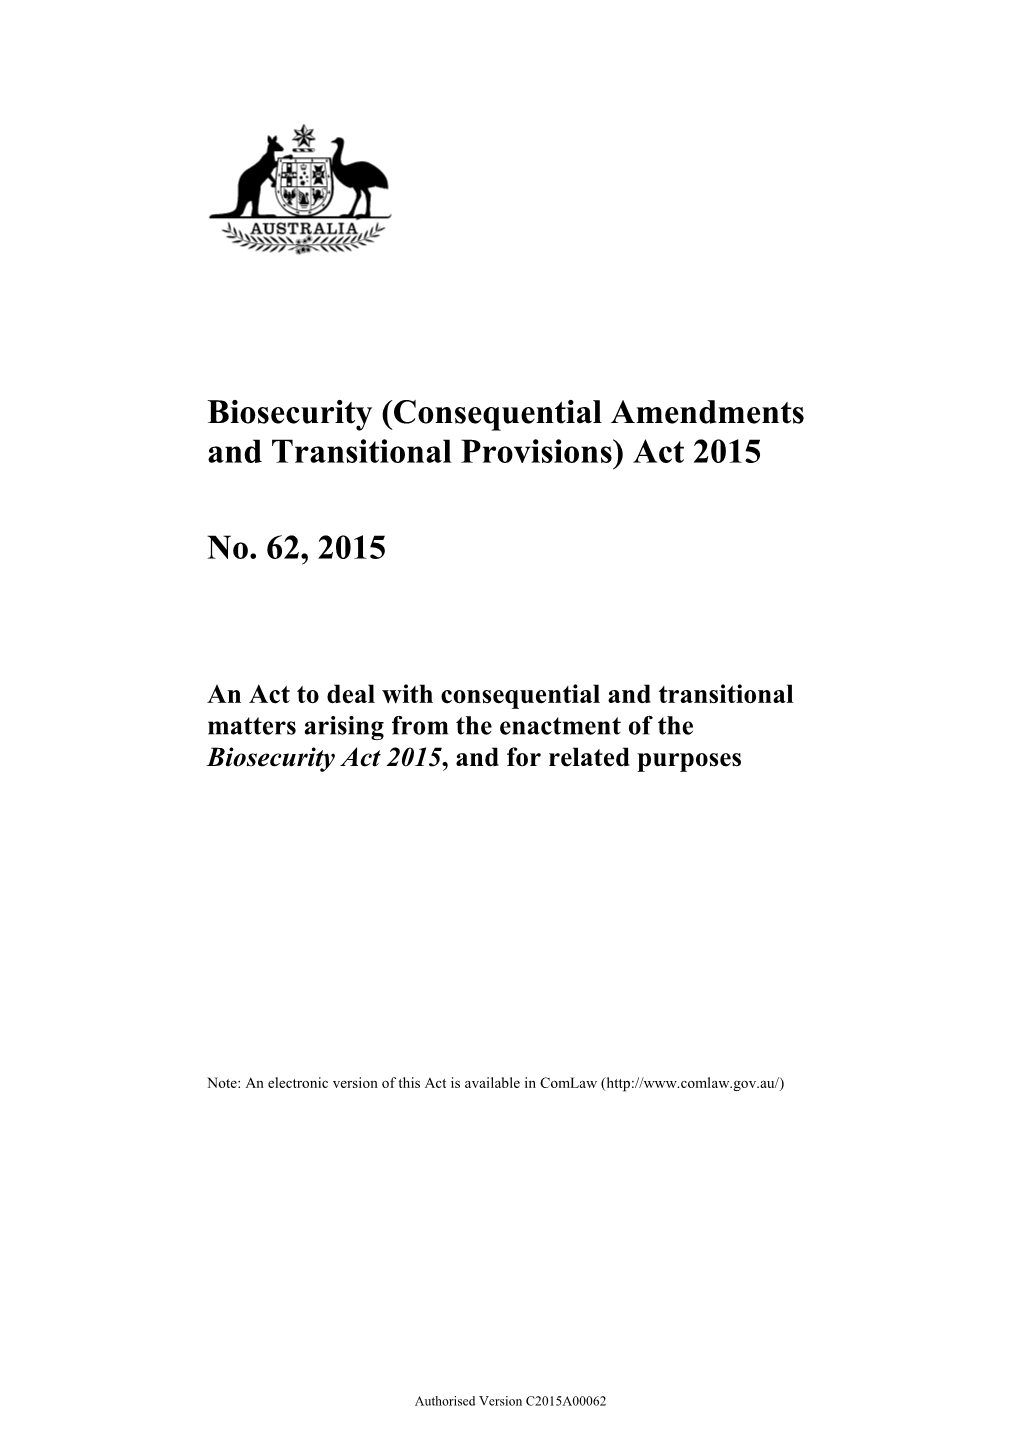 Biosecurity (Consequential Amendments and Transitional Provisions) Act 2015